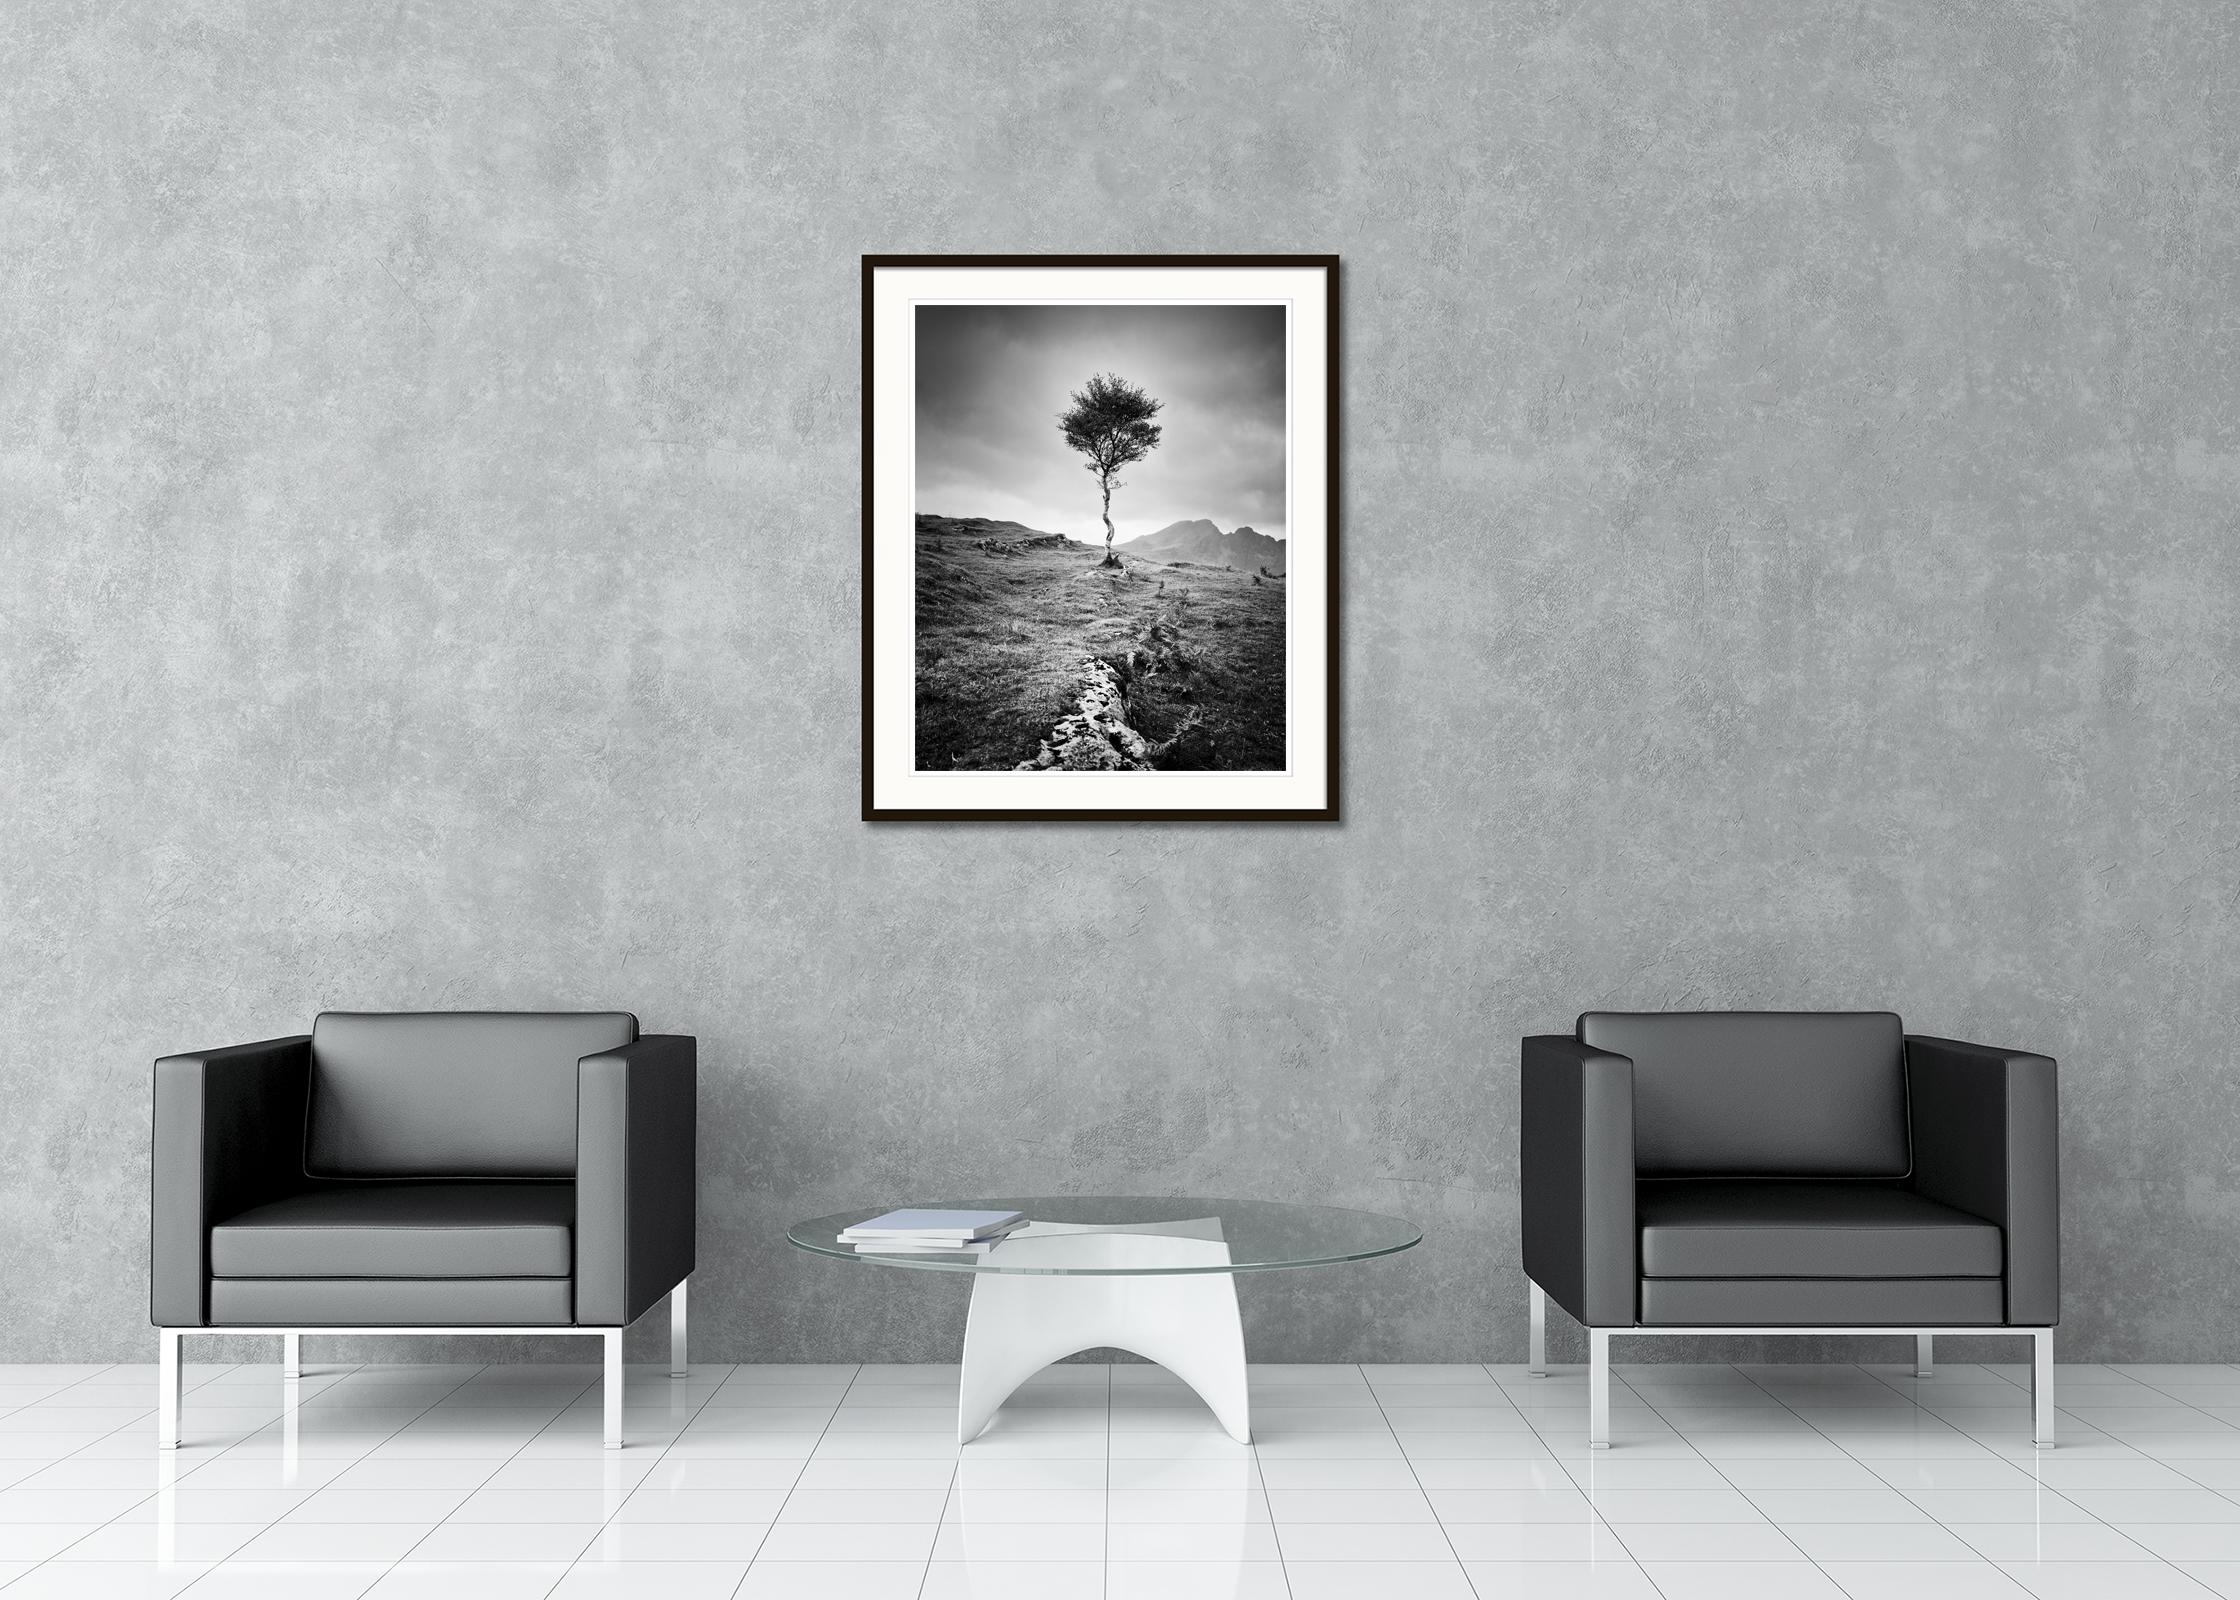 Black and white fine art landscape photography. Lone birch tree in the mountains on the isle of sky in Scotland. Archival pigment ink print, edition of 7. Signed, titled, dated and numbered by artist. Certificate of authenticity included. Printed